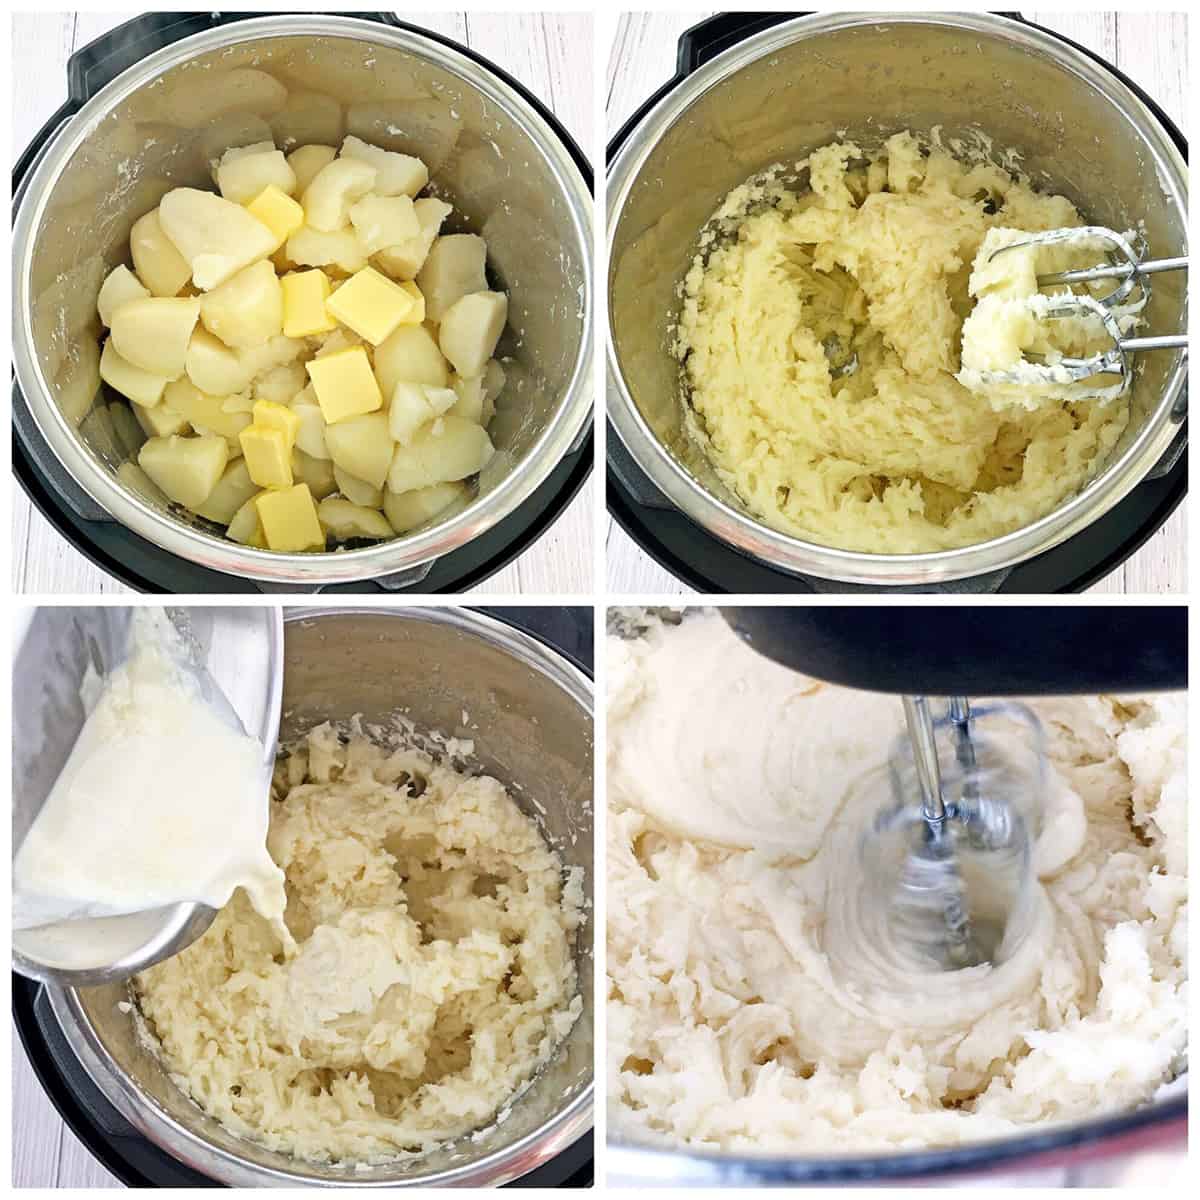 Spread out cubed butter over drained potatoes and then using a hand mixer, potato masher, or potato ricer, cream the potatoes well.